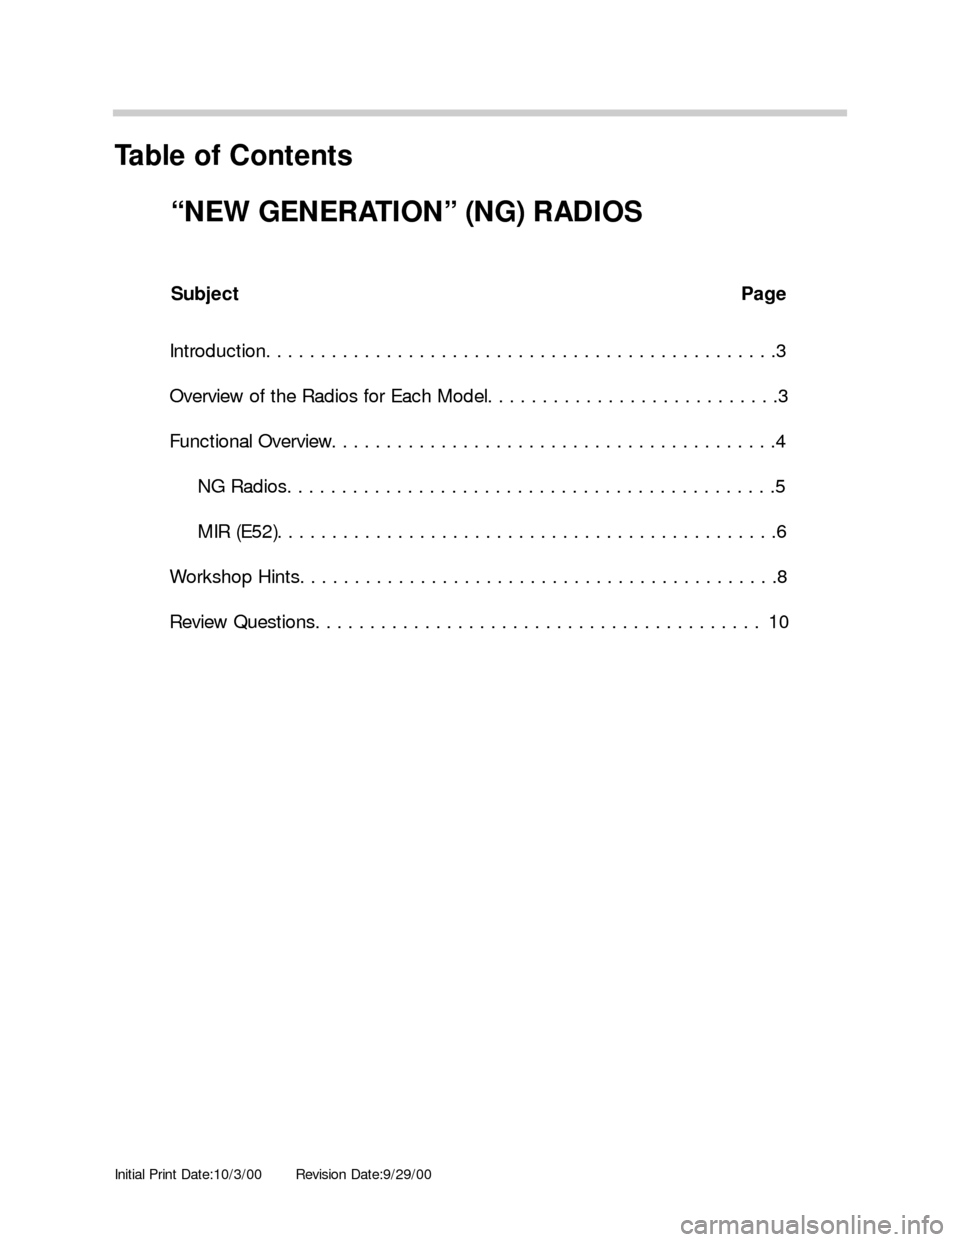 BMW X5 2003 E53 New Generation Radios Manual Initial Print Date:10/3/00Revision Date:9/29/00
Subject Page
Introduction. . . . . . . . . . . . . . . . . . . . . . . . . . . . . . . . . . . . . . . . . . . . . . .3
Overview of the Radios for Each 